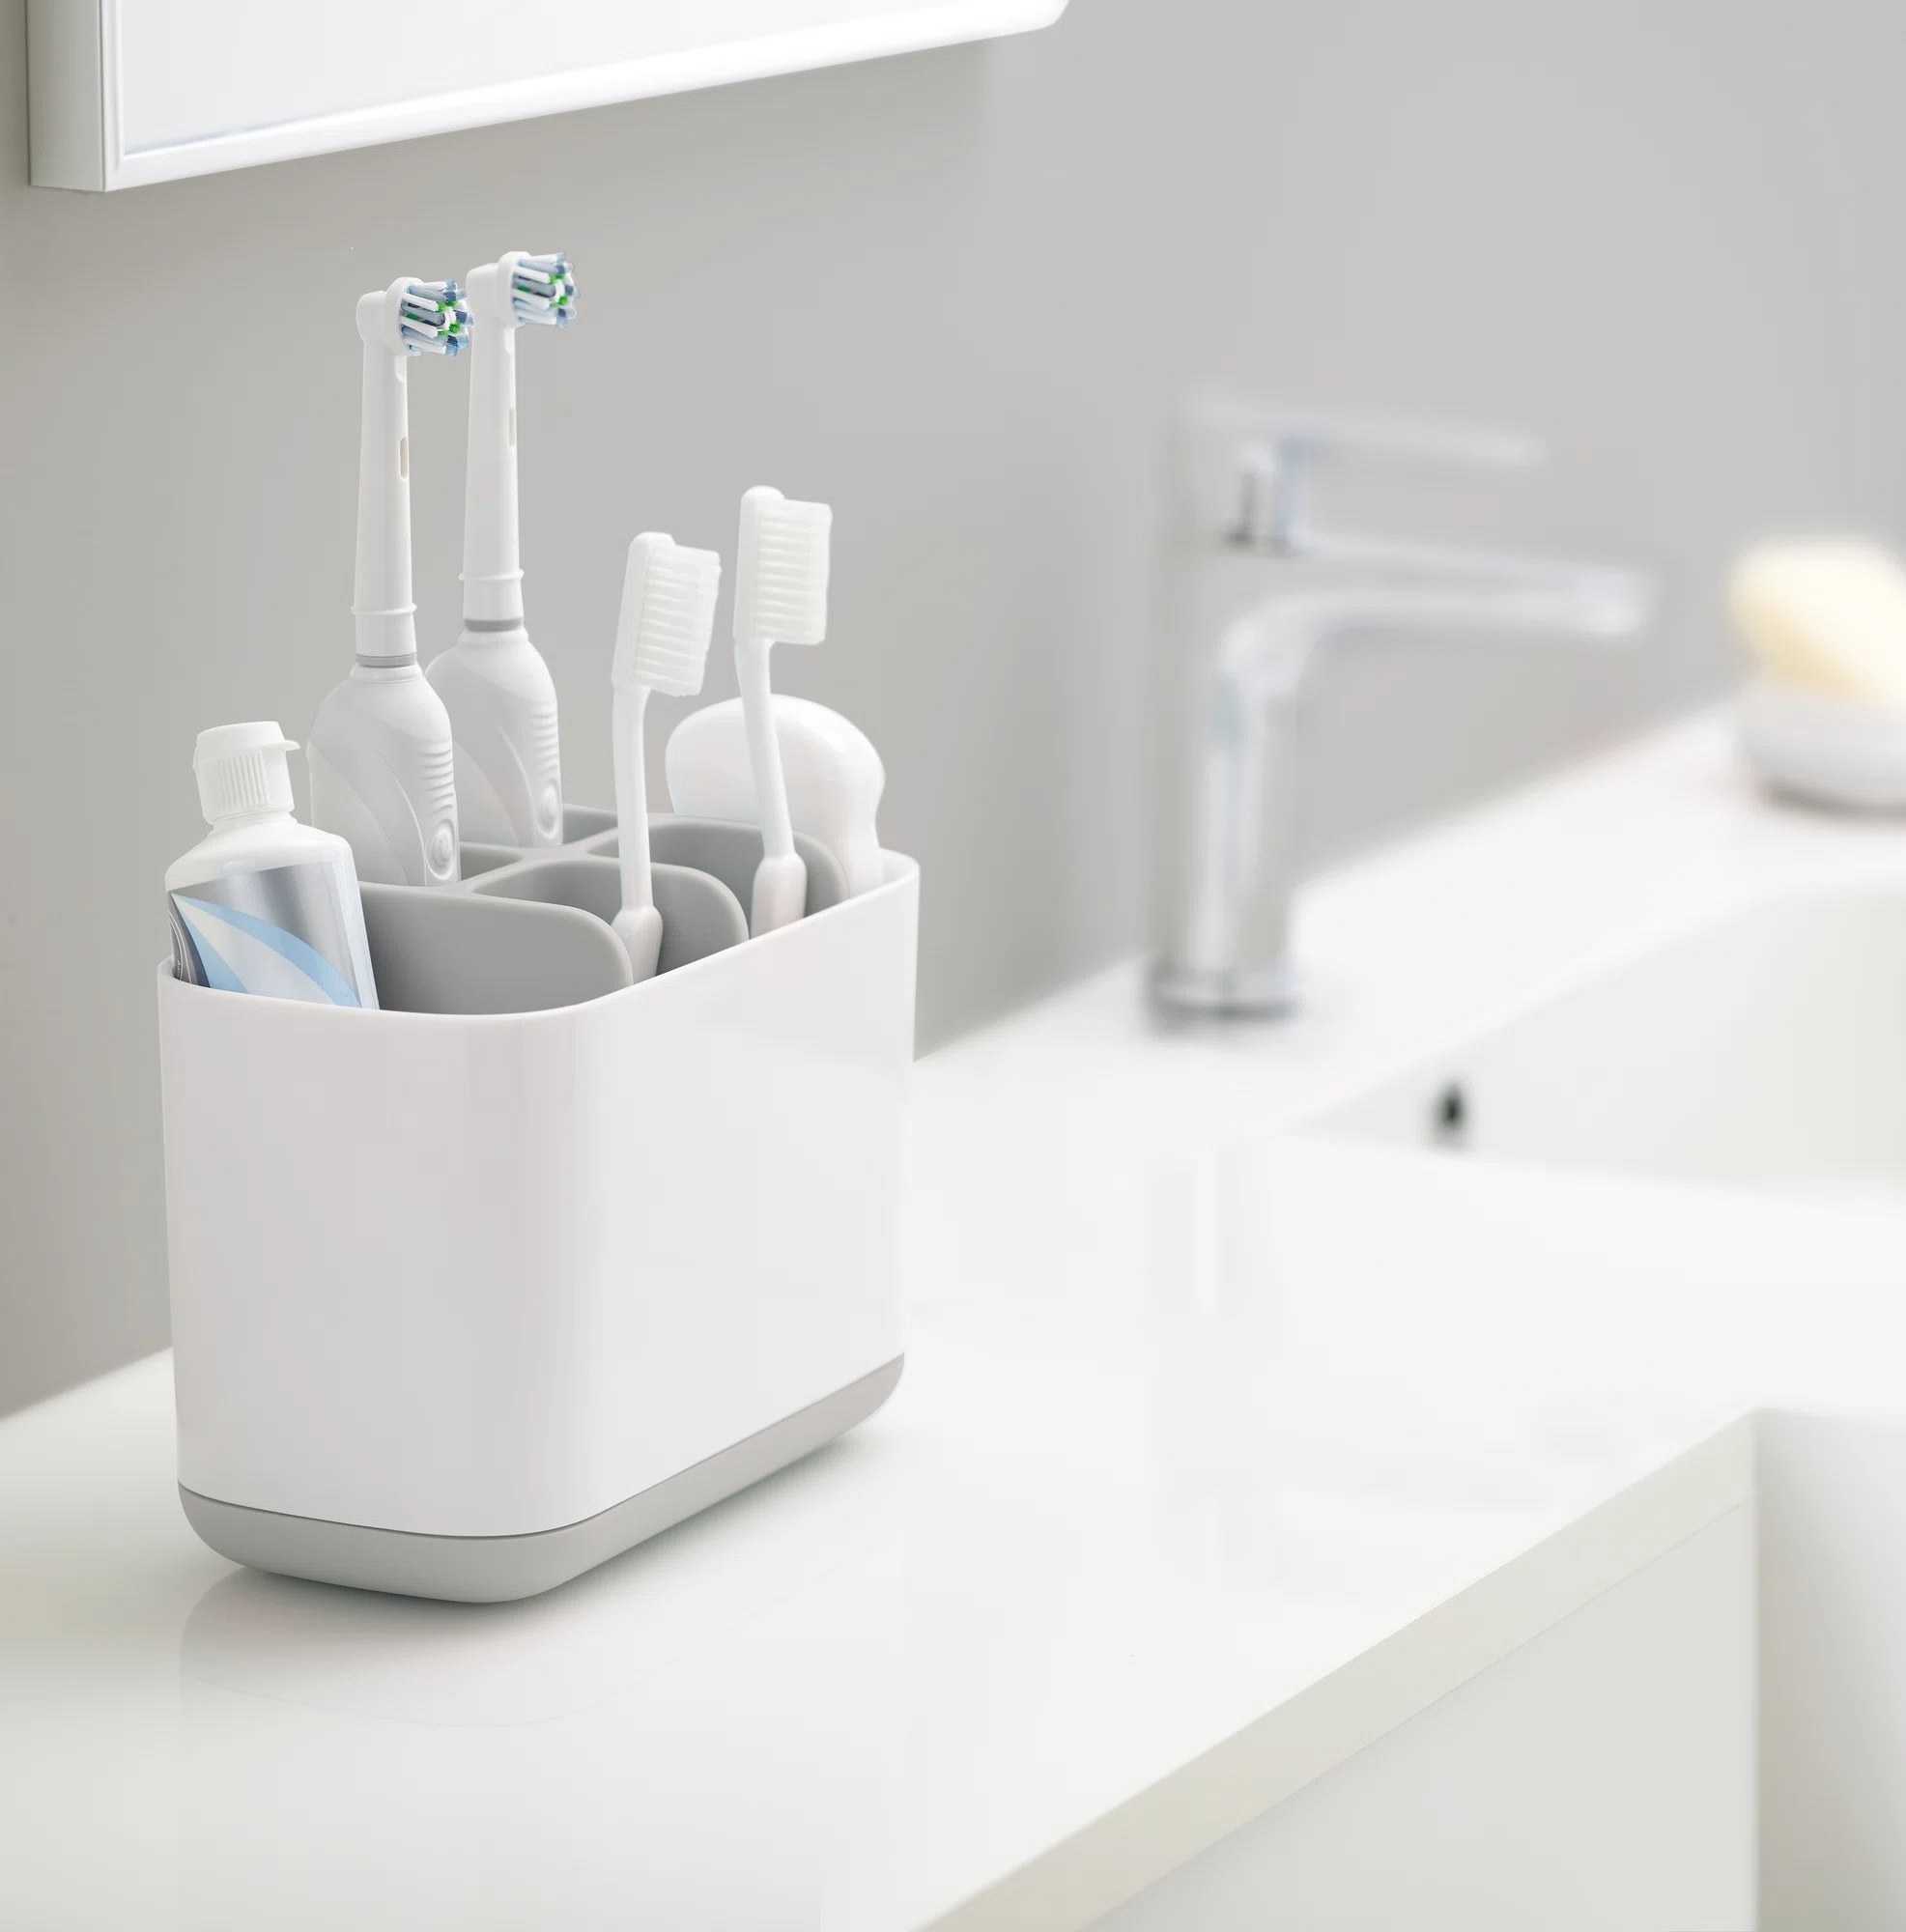 a white and gray toothbrush holder holding four toothbrushes and toothpaste